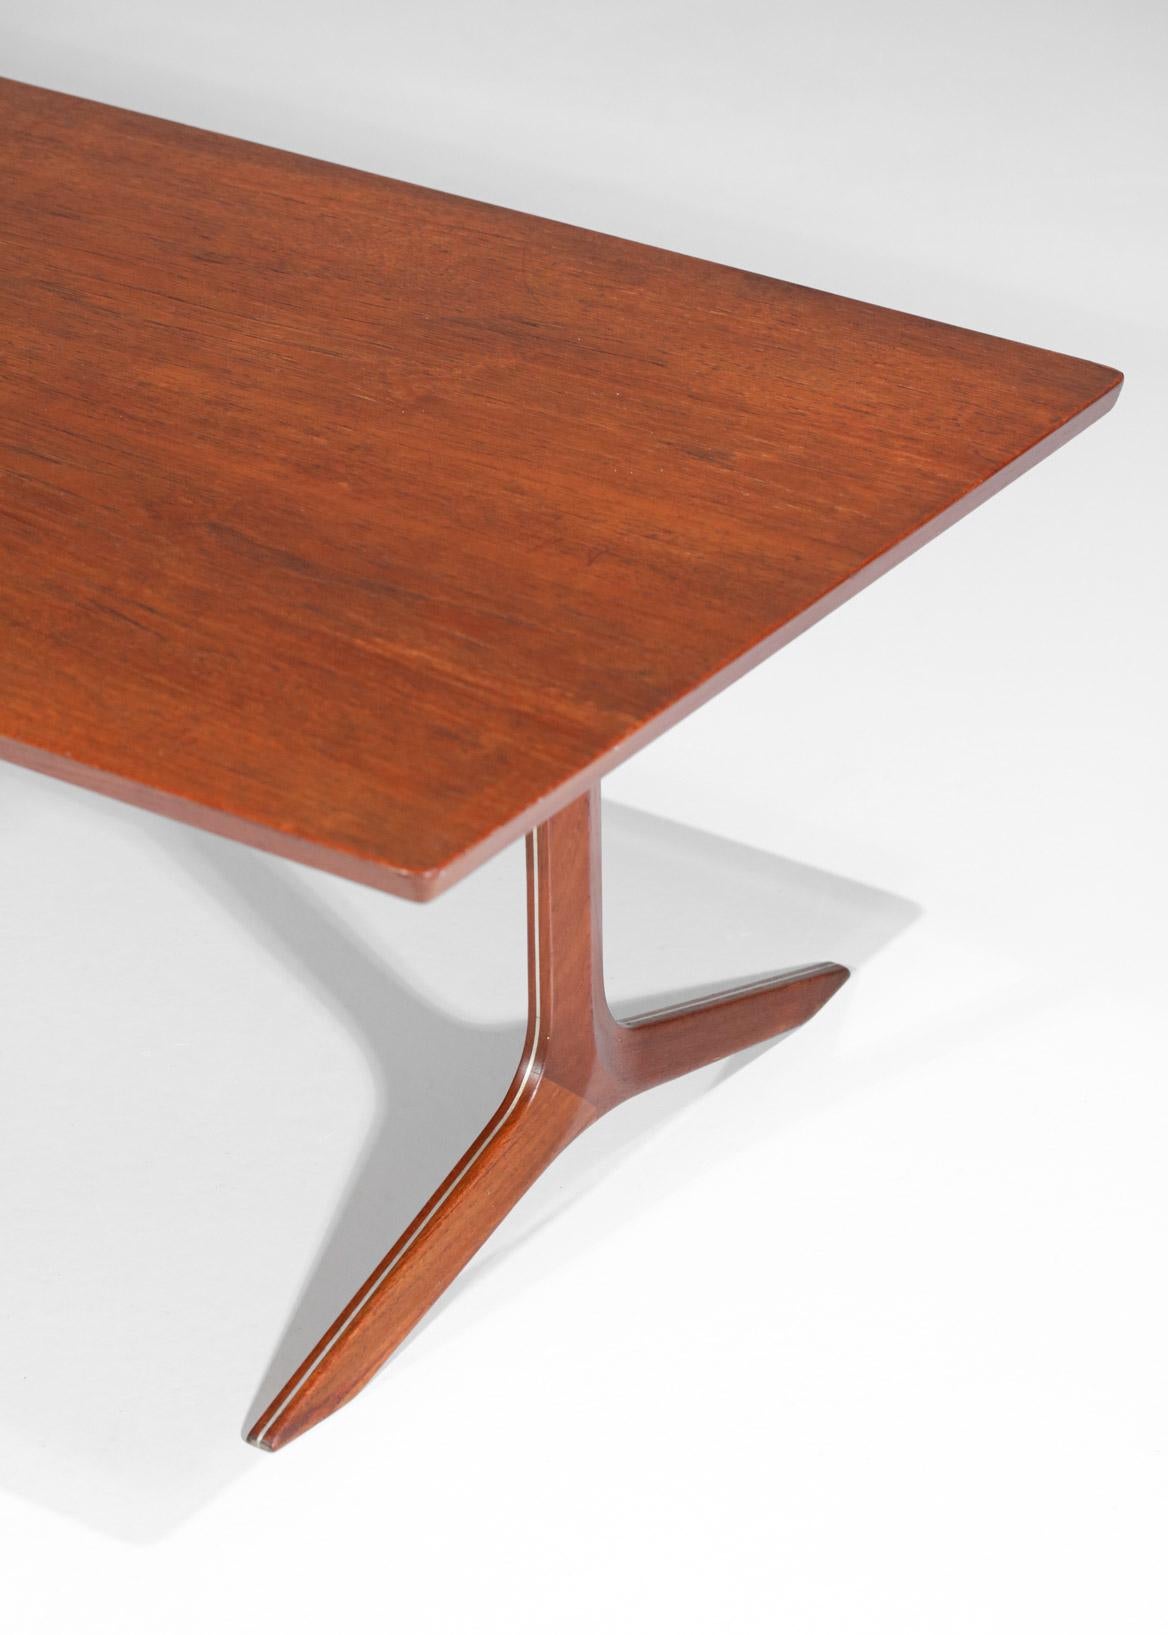 Mid-20th Century Rare Danish Coffee Table by Peter Hvidt and Orla Molgaard Scandinavian, F143 For Sale